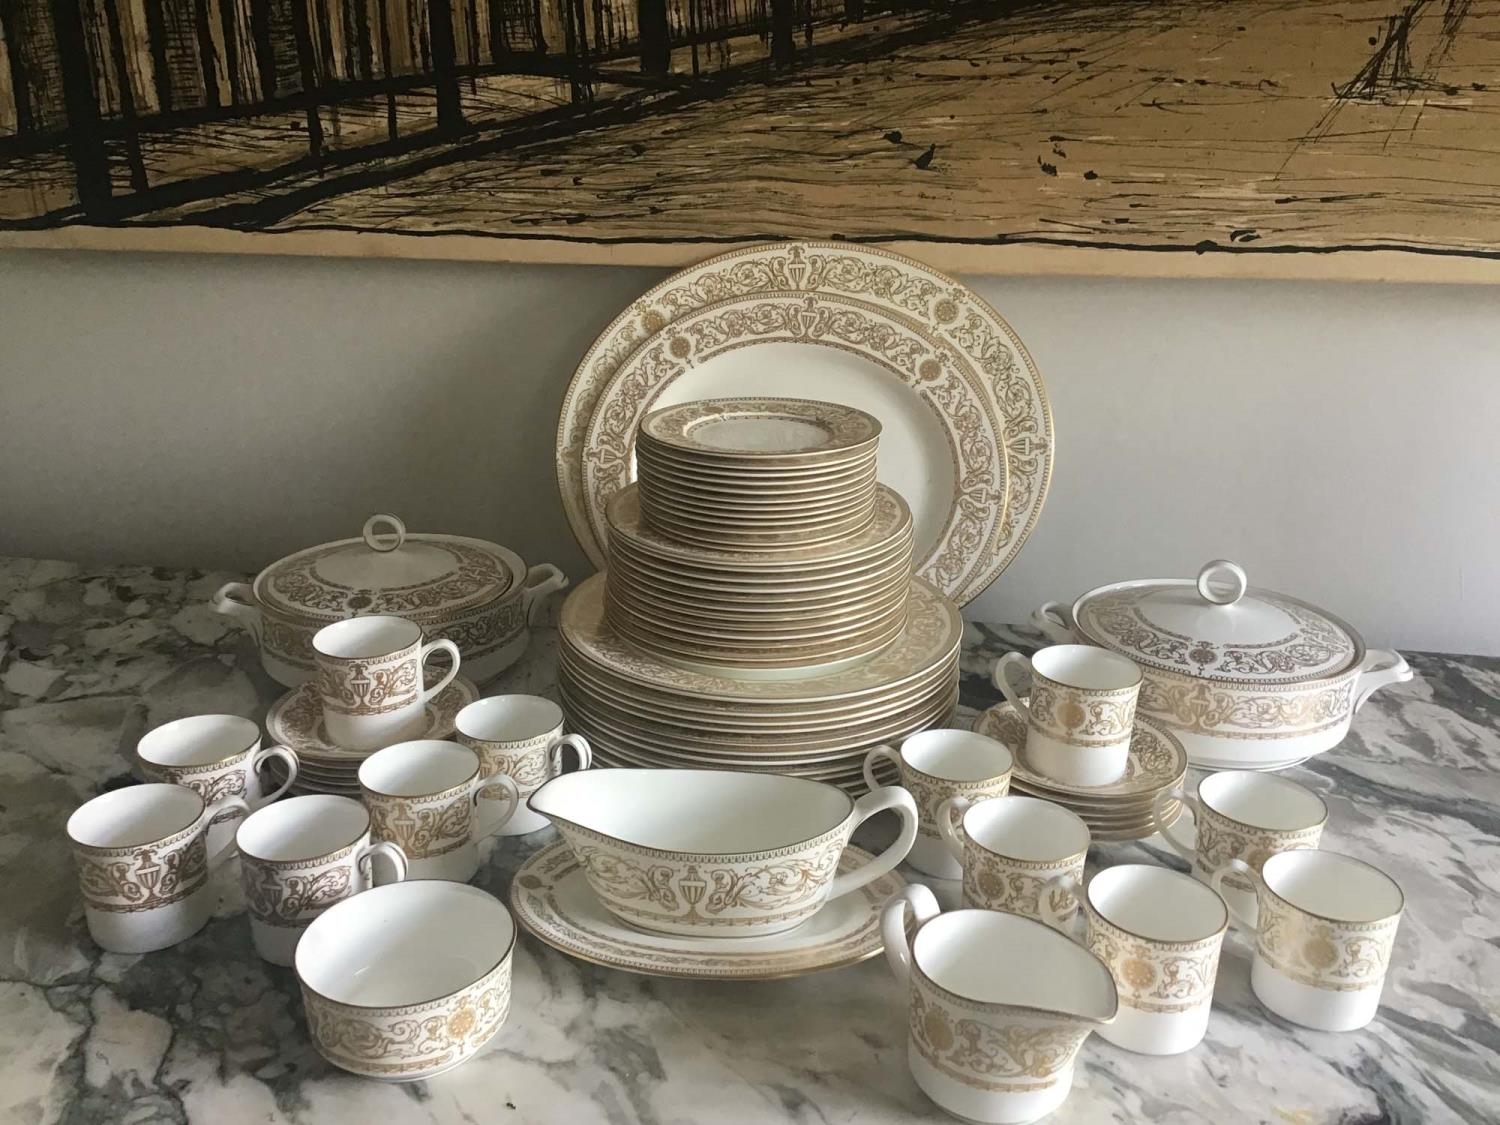 DINNER SERVICE, English fine bone china, Hyde park, 12 place, 5 piece settings, approx 68 pieces. (